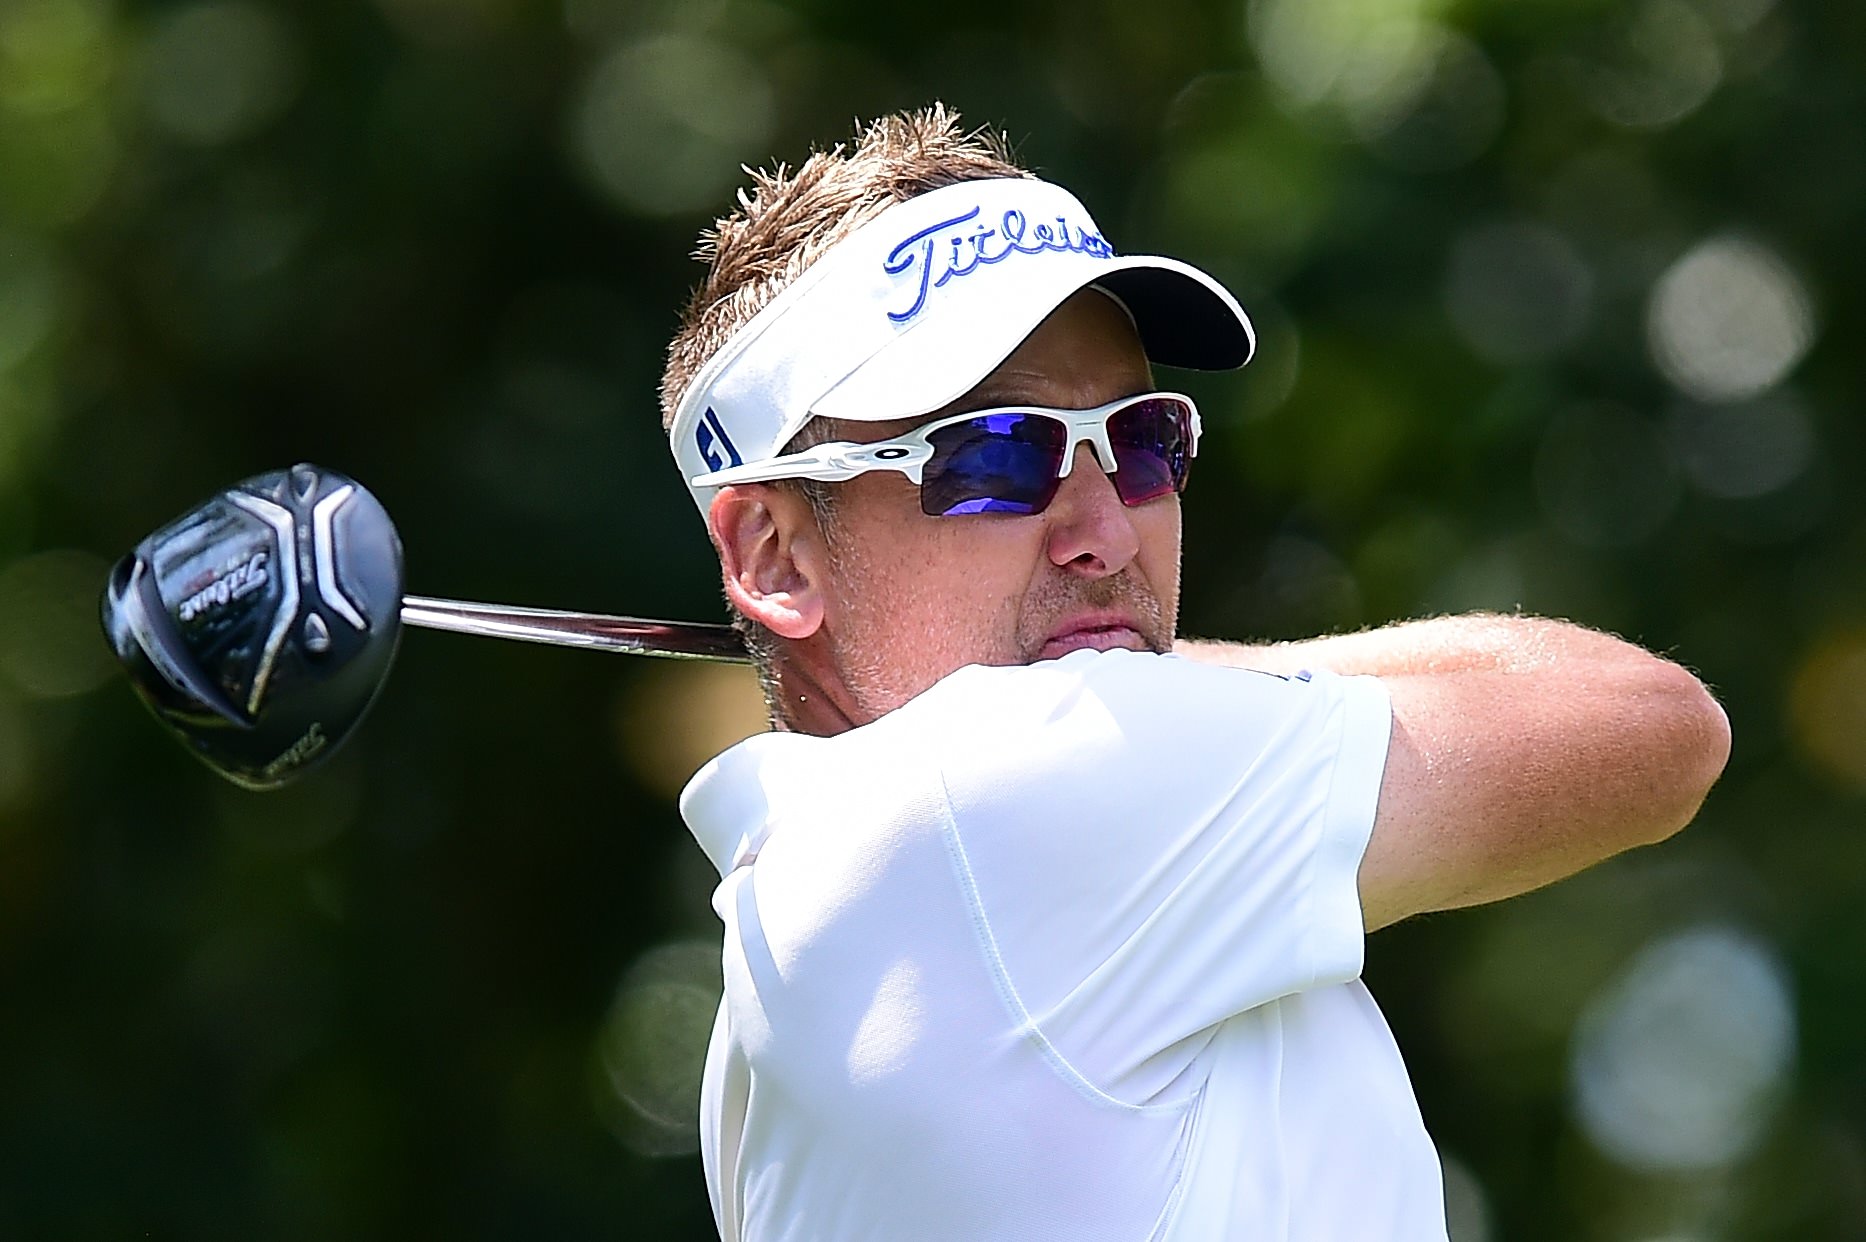 ICYMI: Poulter's card safe, PGA Tour get tough and Crane embarrassed into paying up